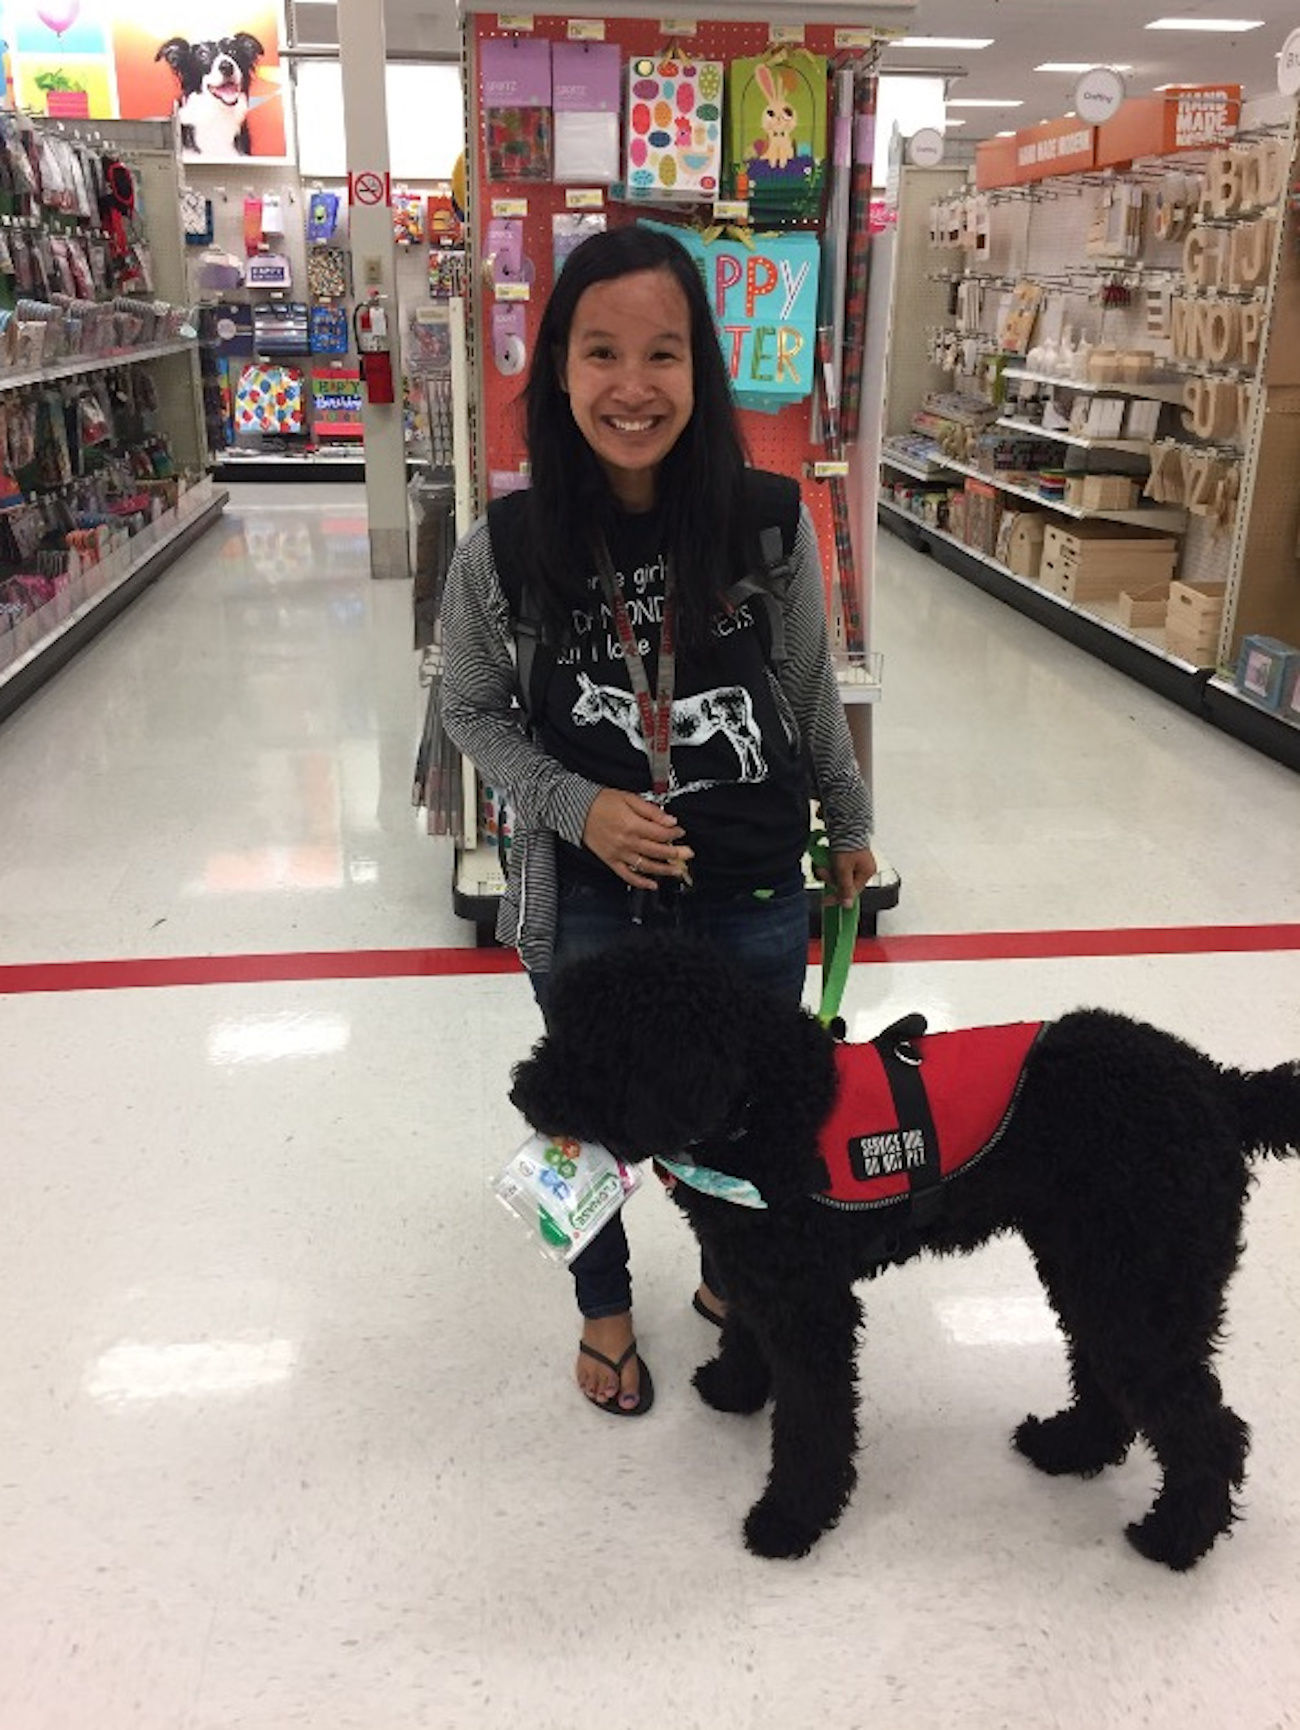 Sara with her service dog Rufus in front of a store aisle